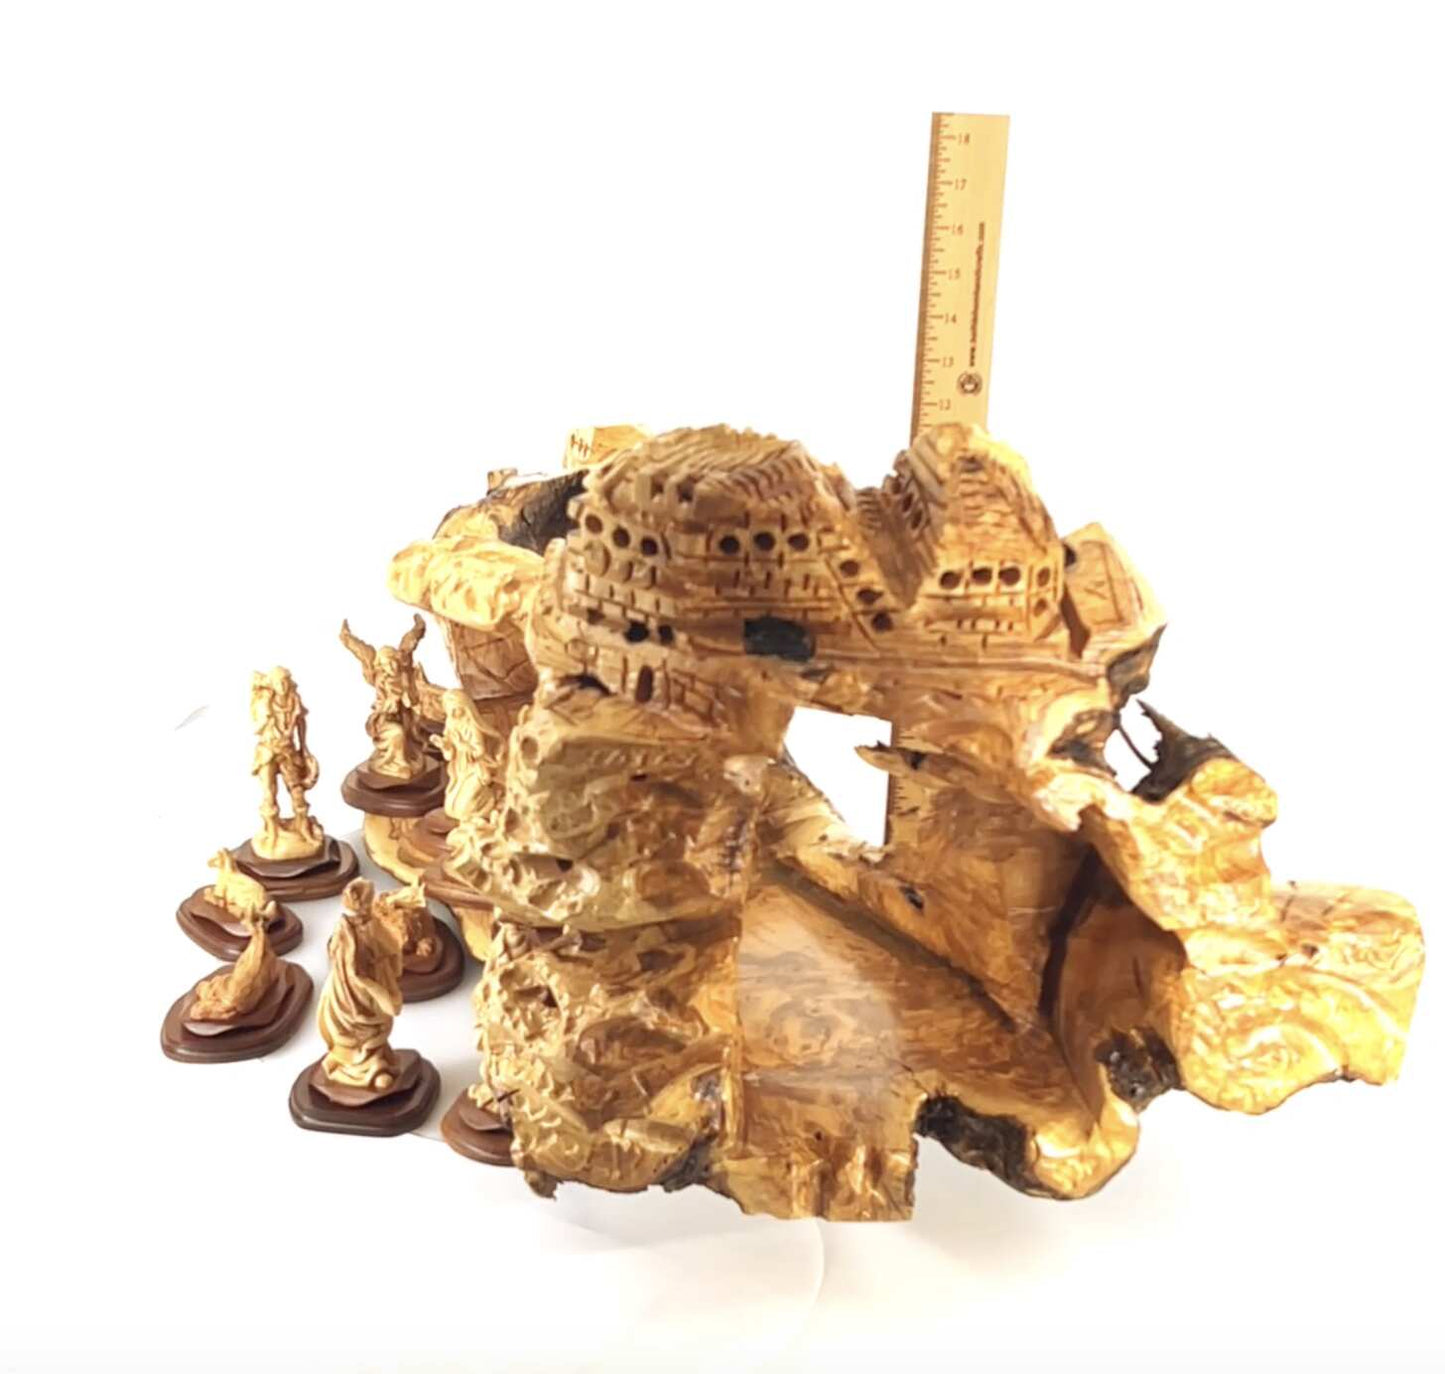 Unique Natural Olive Wood Nativity Scene, with 'Masterpiece Figurines', from Olive Wood in Bethlehem